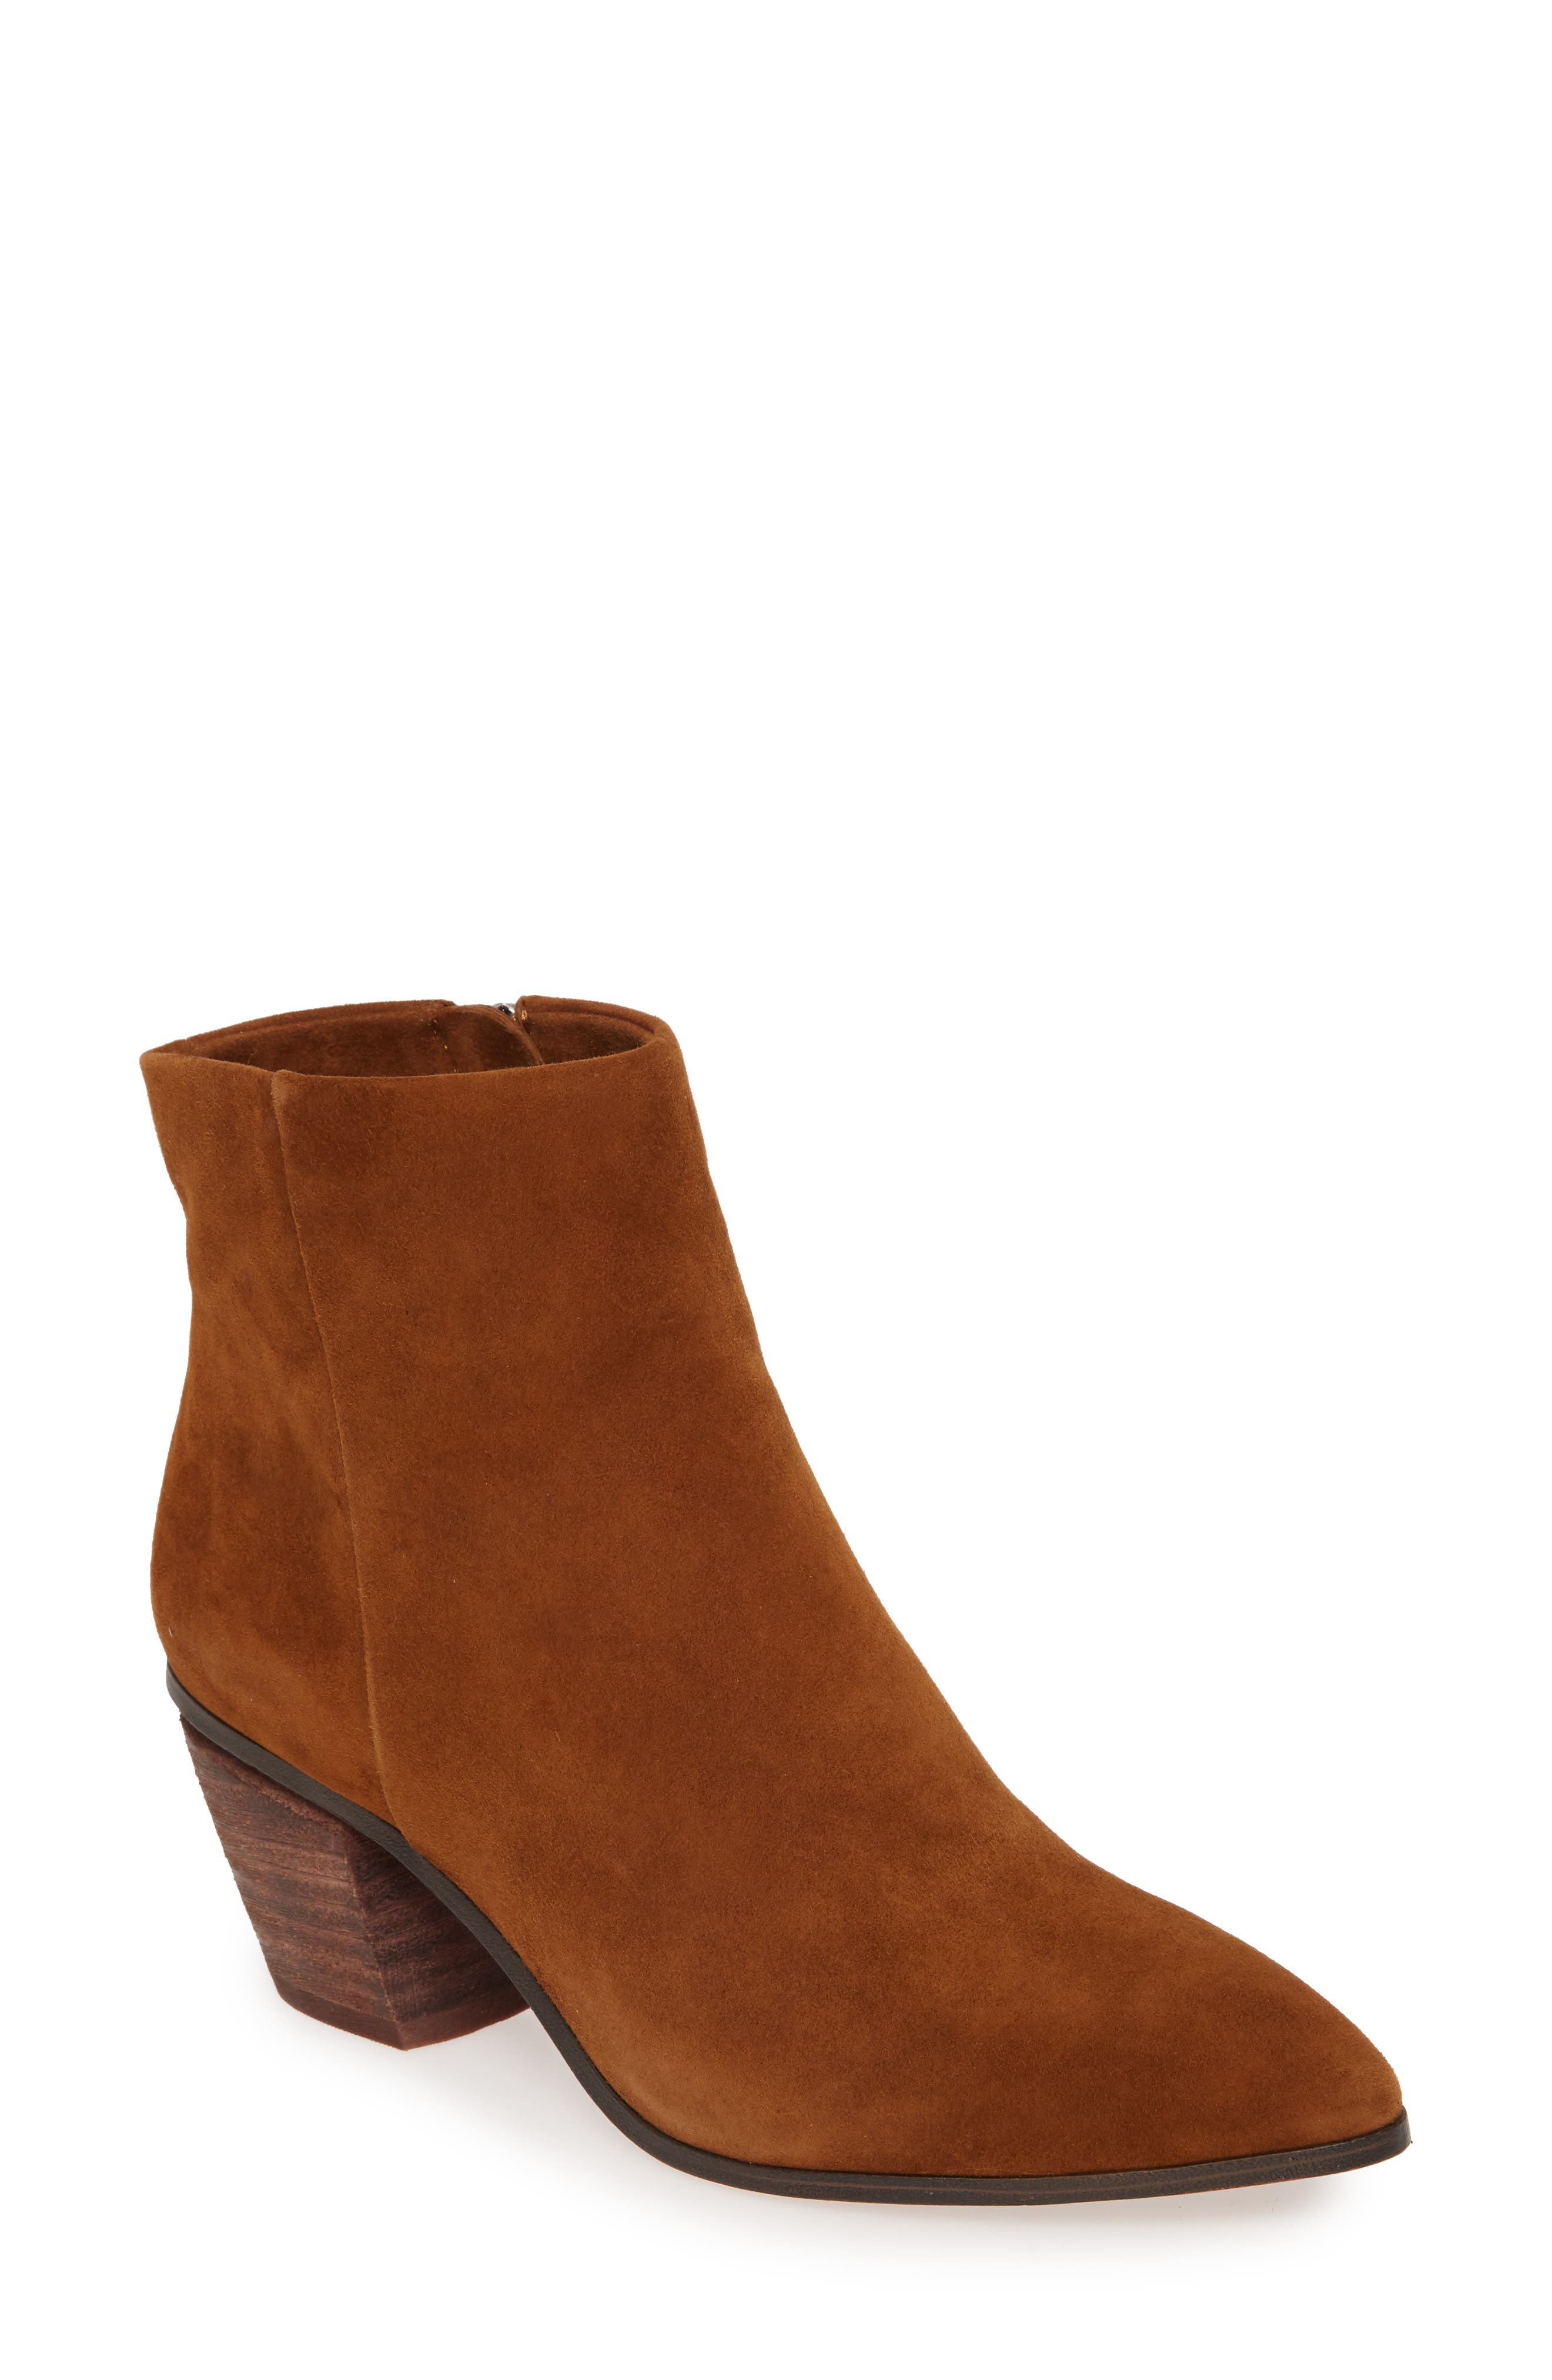 nordstrom booties vince camuto